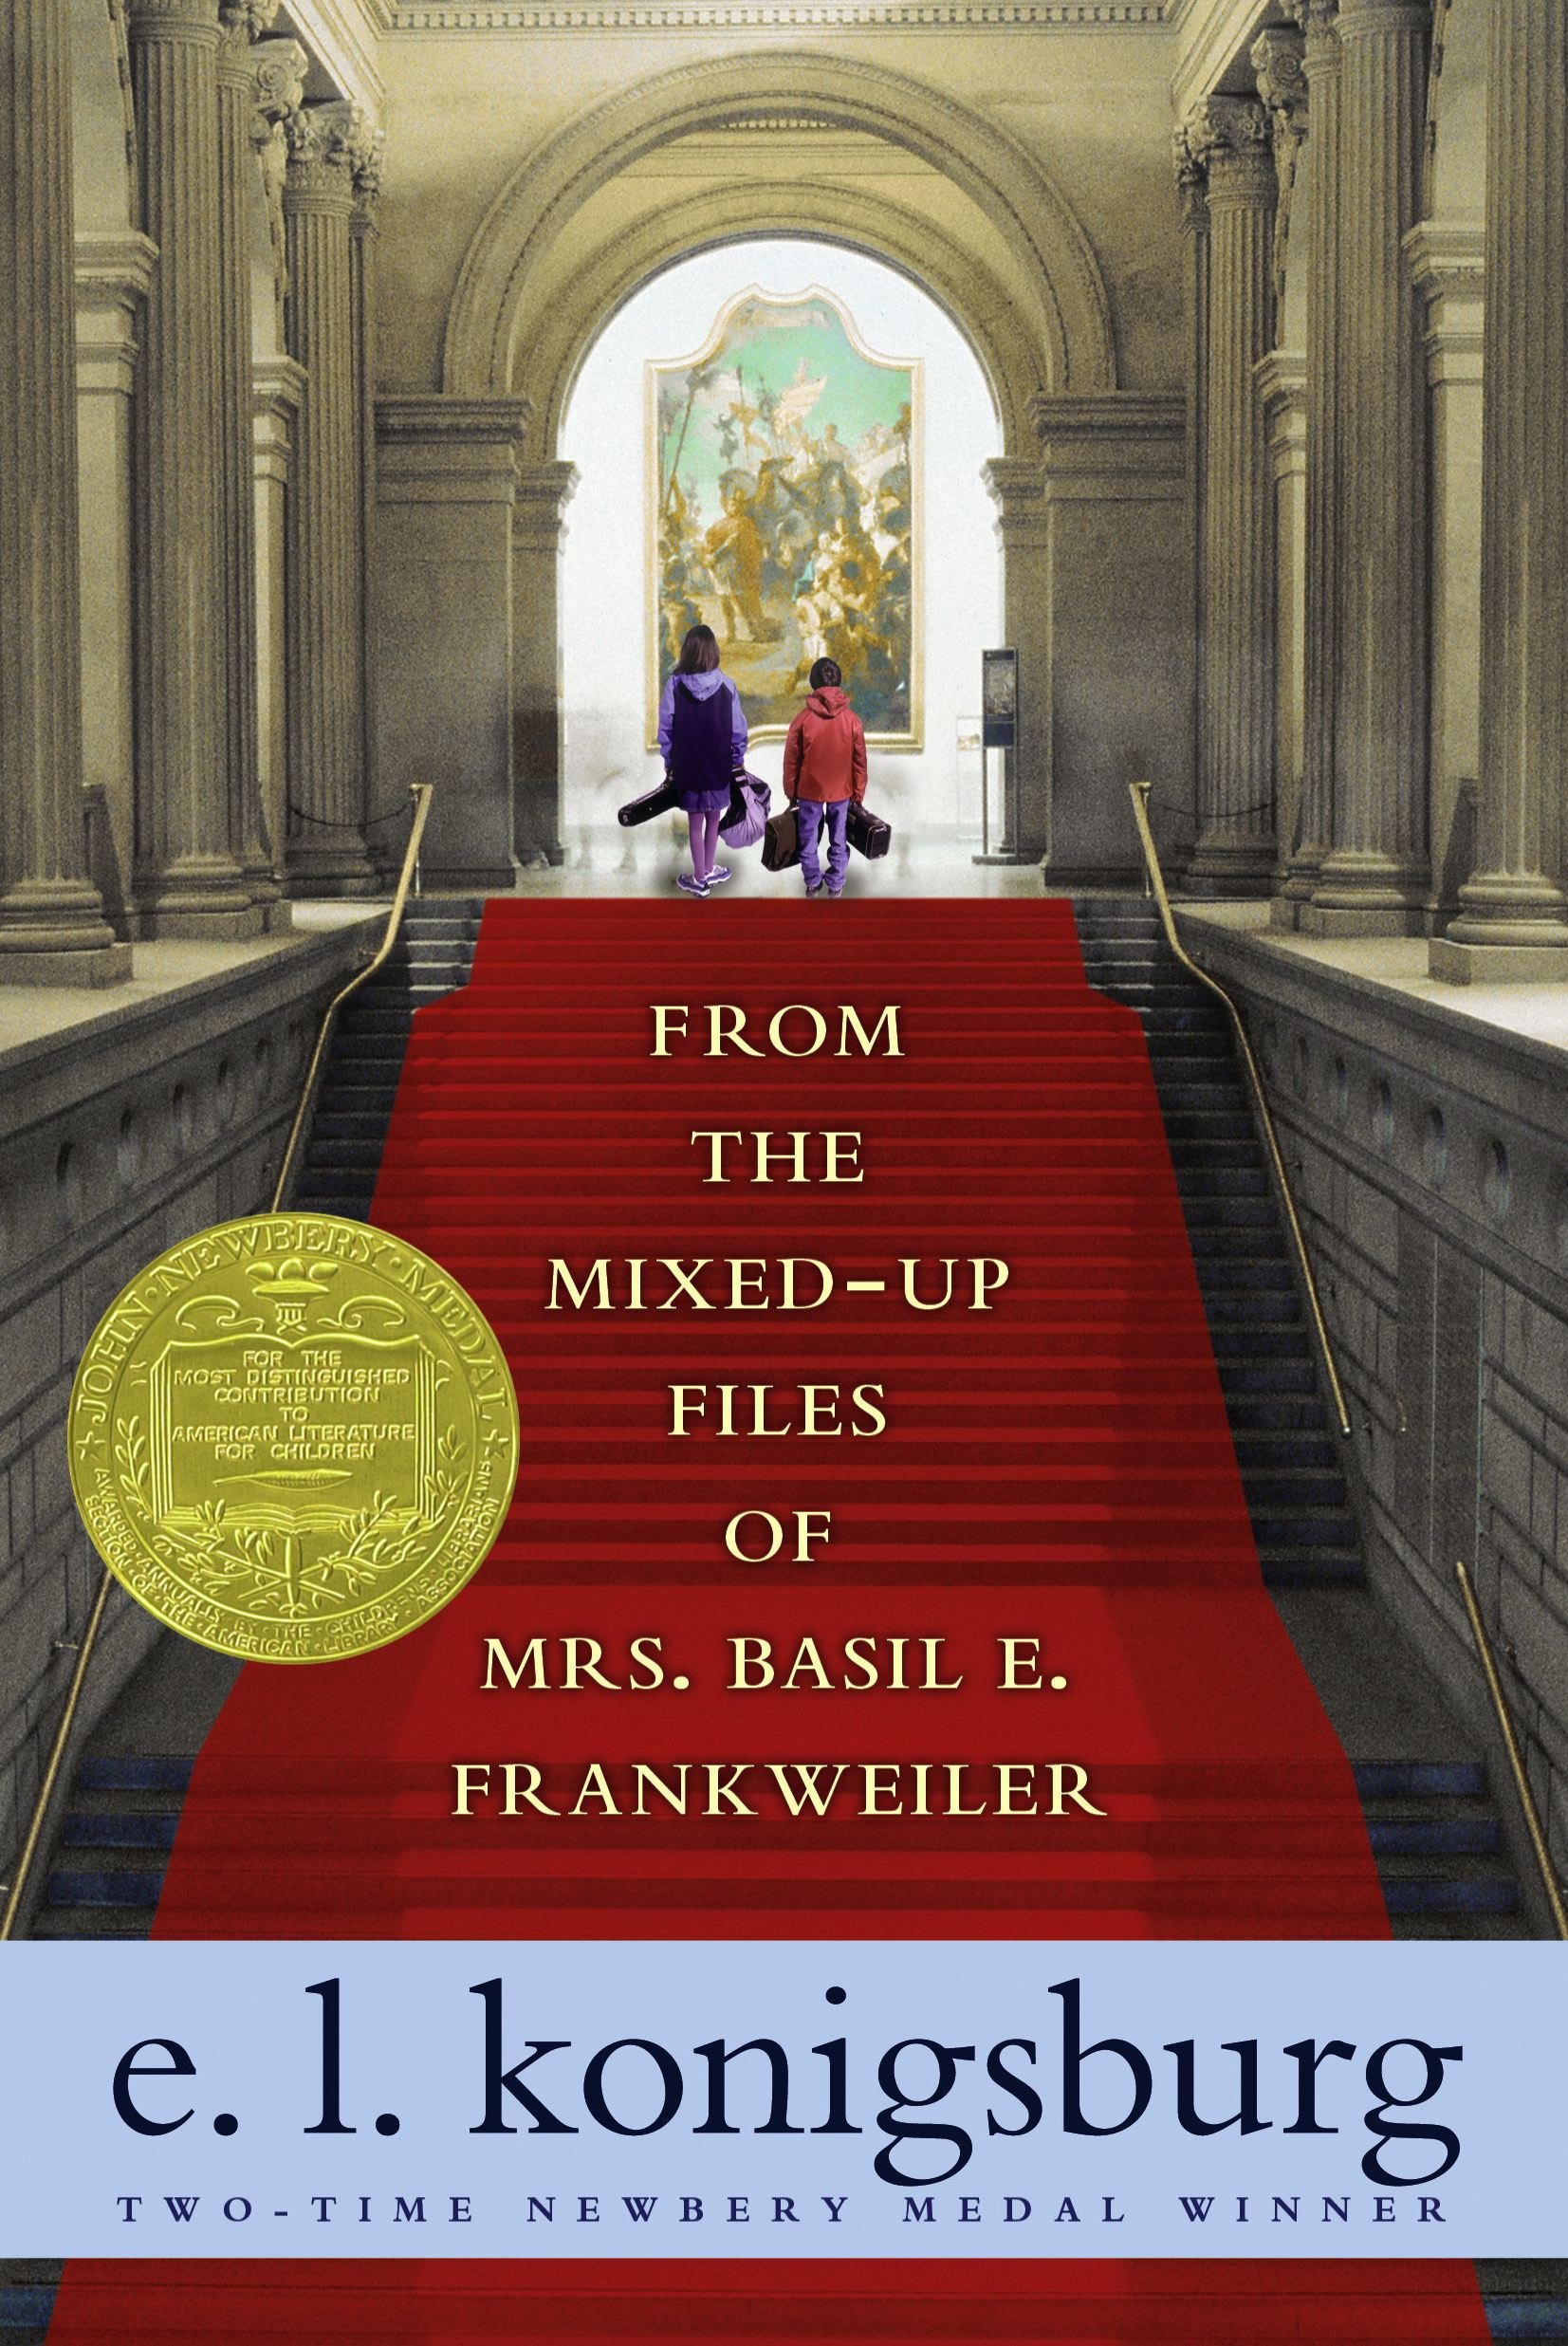 From the mixed-up files of Mrs. Basil Frankweiler 책표지